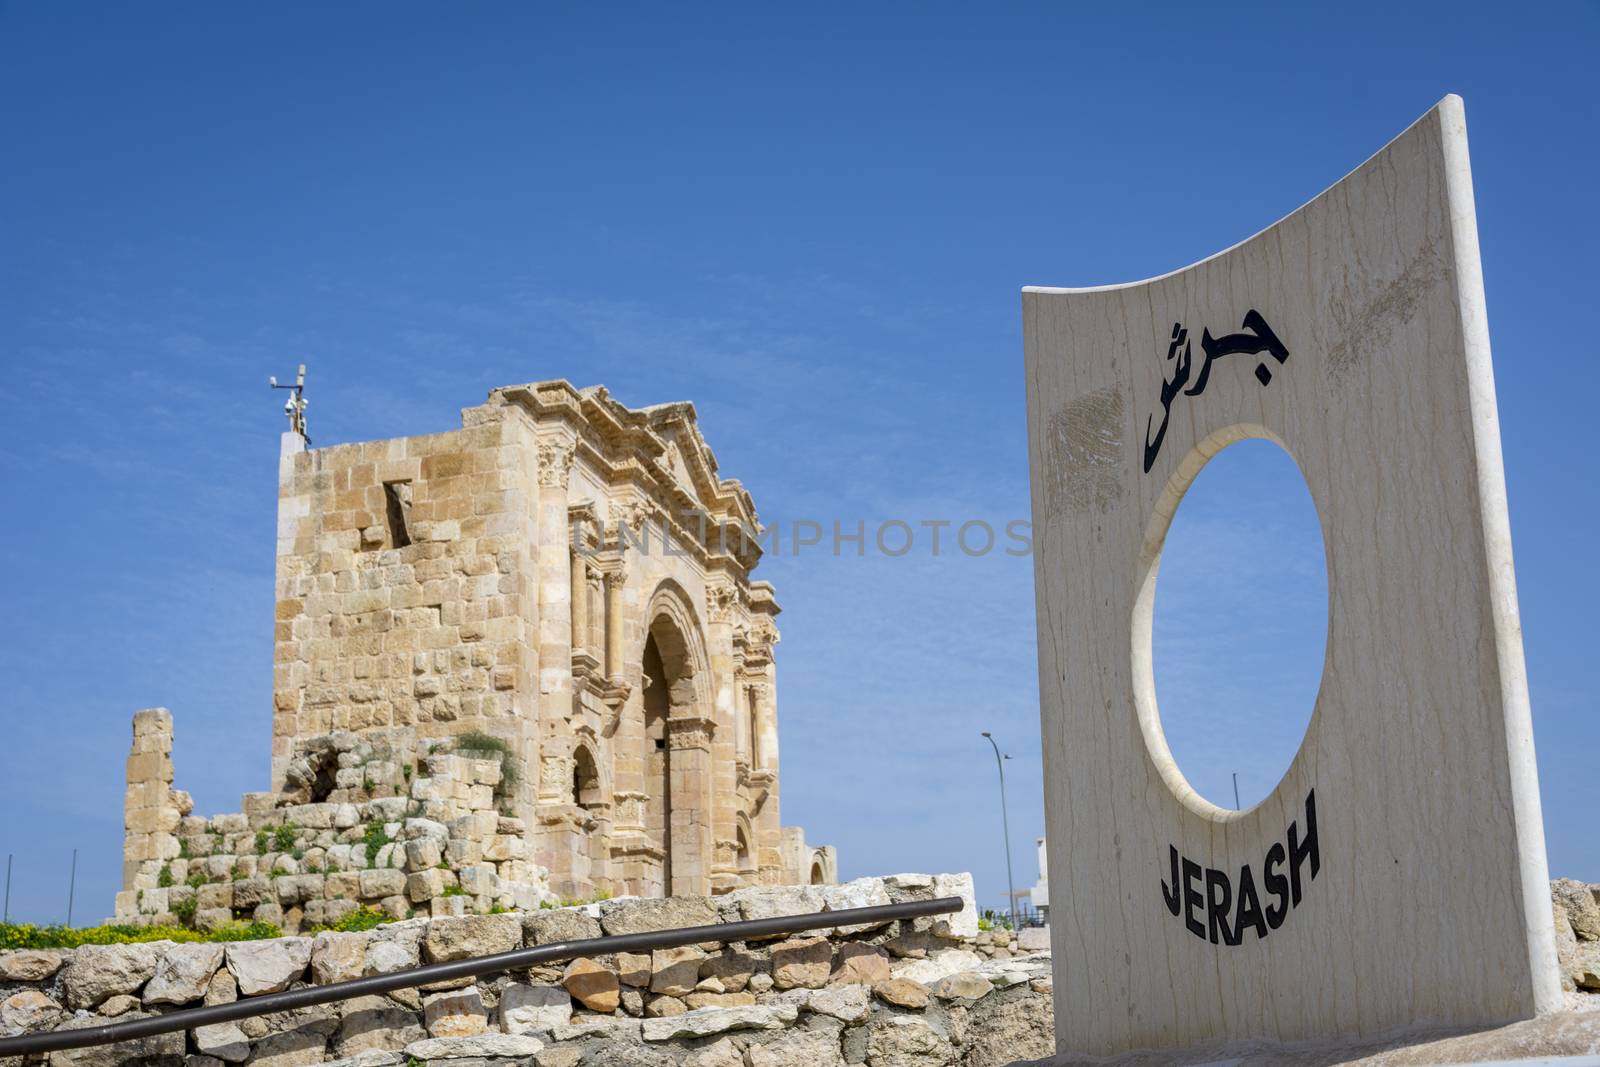 Gerasa, Jerash, Jordan: entrance of the historical roman ruins site of Gerasa in Jerash, Jordan, with the Arch of Hadrian in the background by kb79